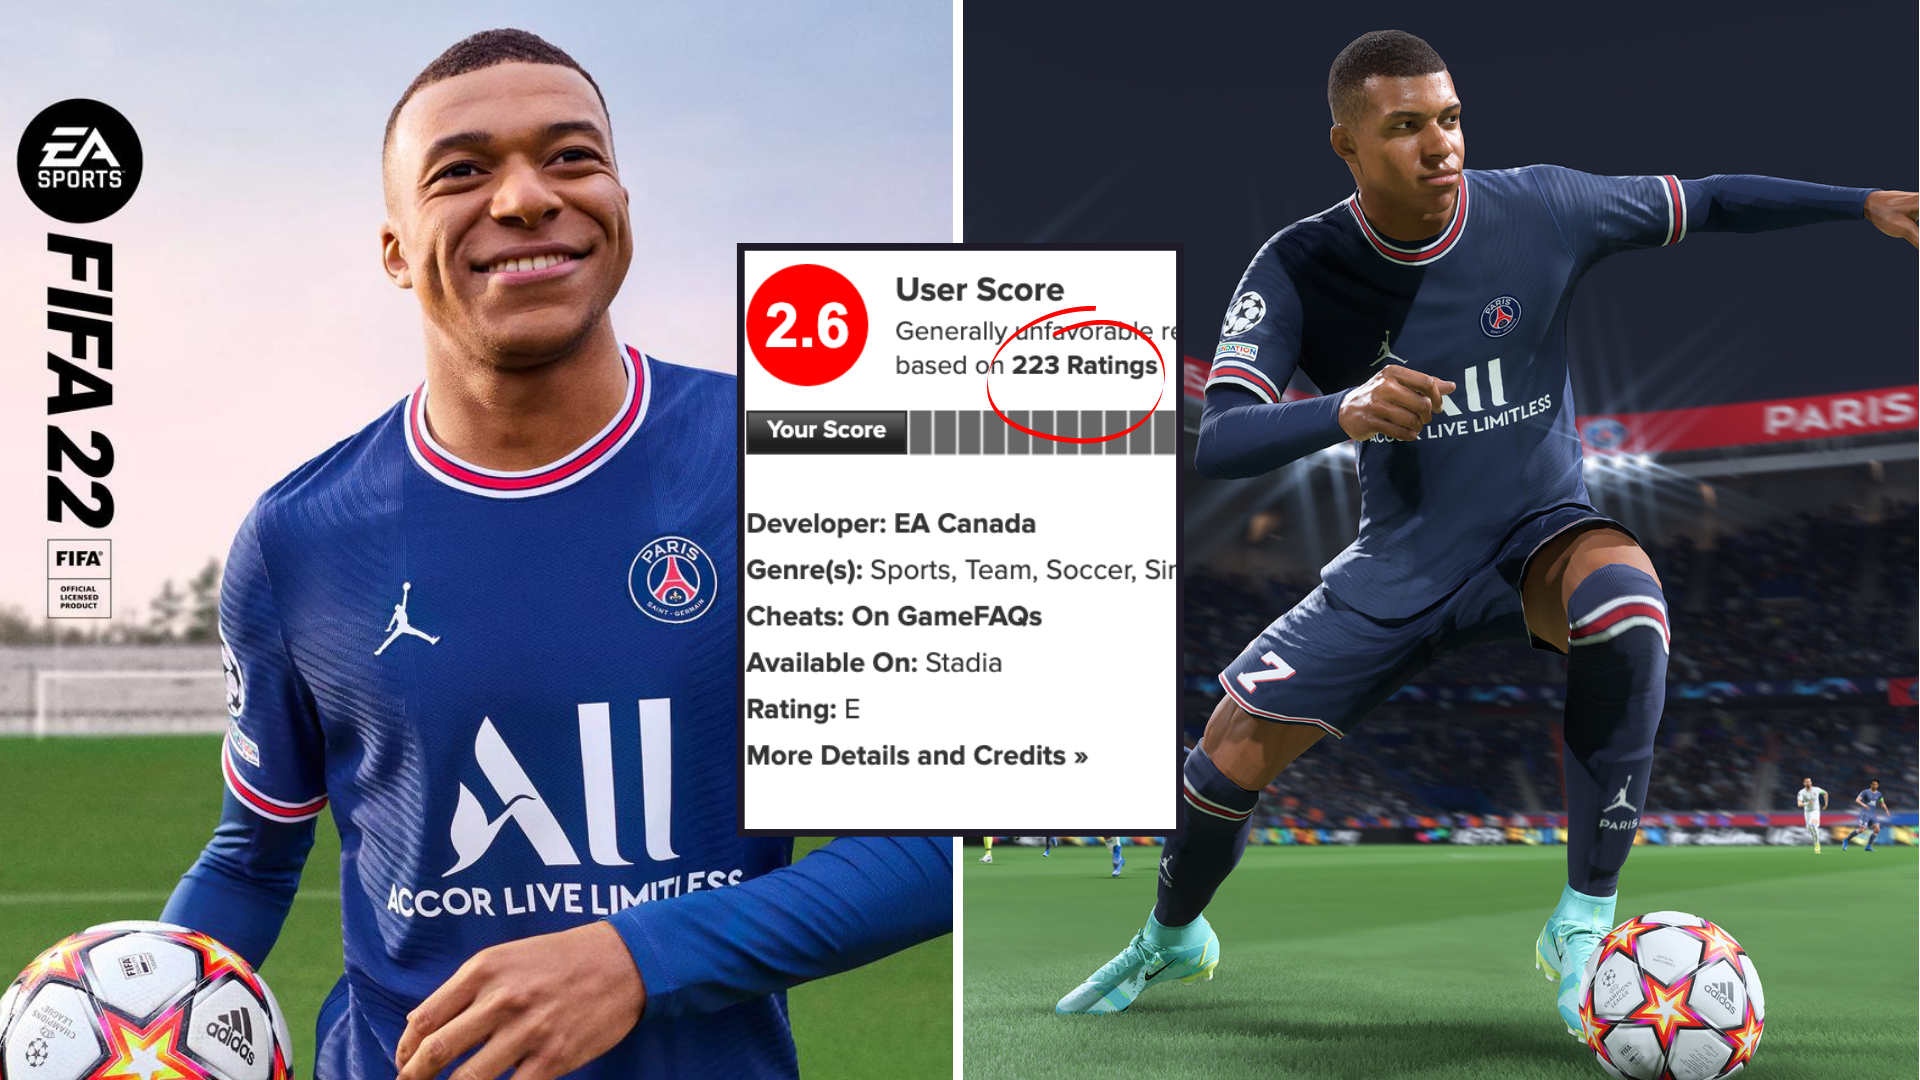 FIFA 22 Review  Trusted Reviews